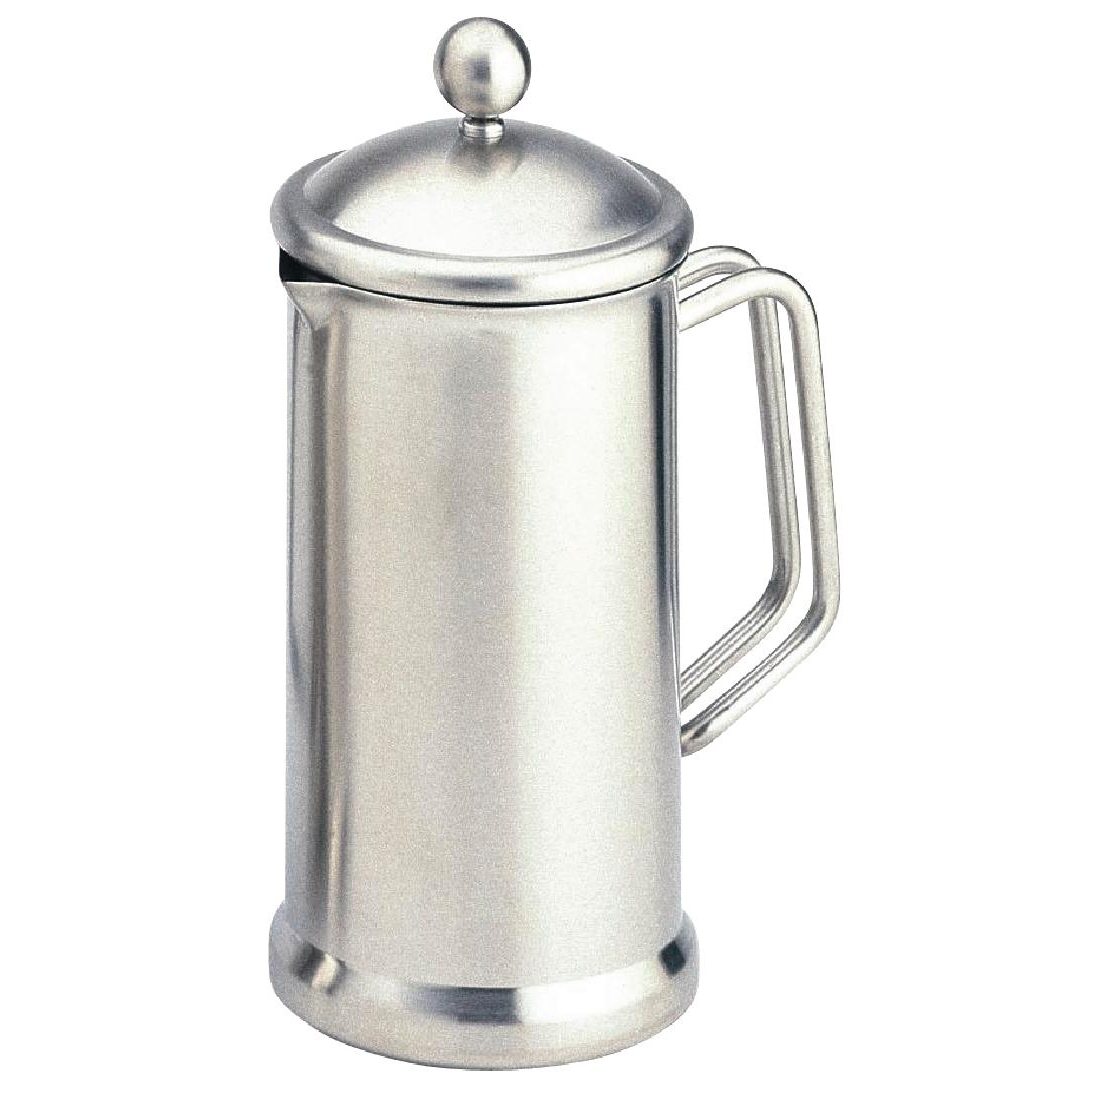 Cafetiere Stainless Steel Satin Finish 8 Cup